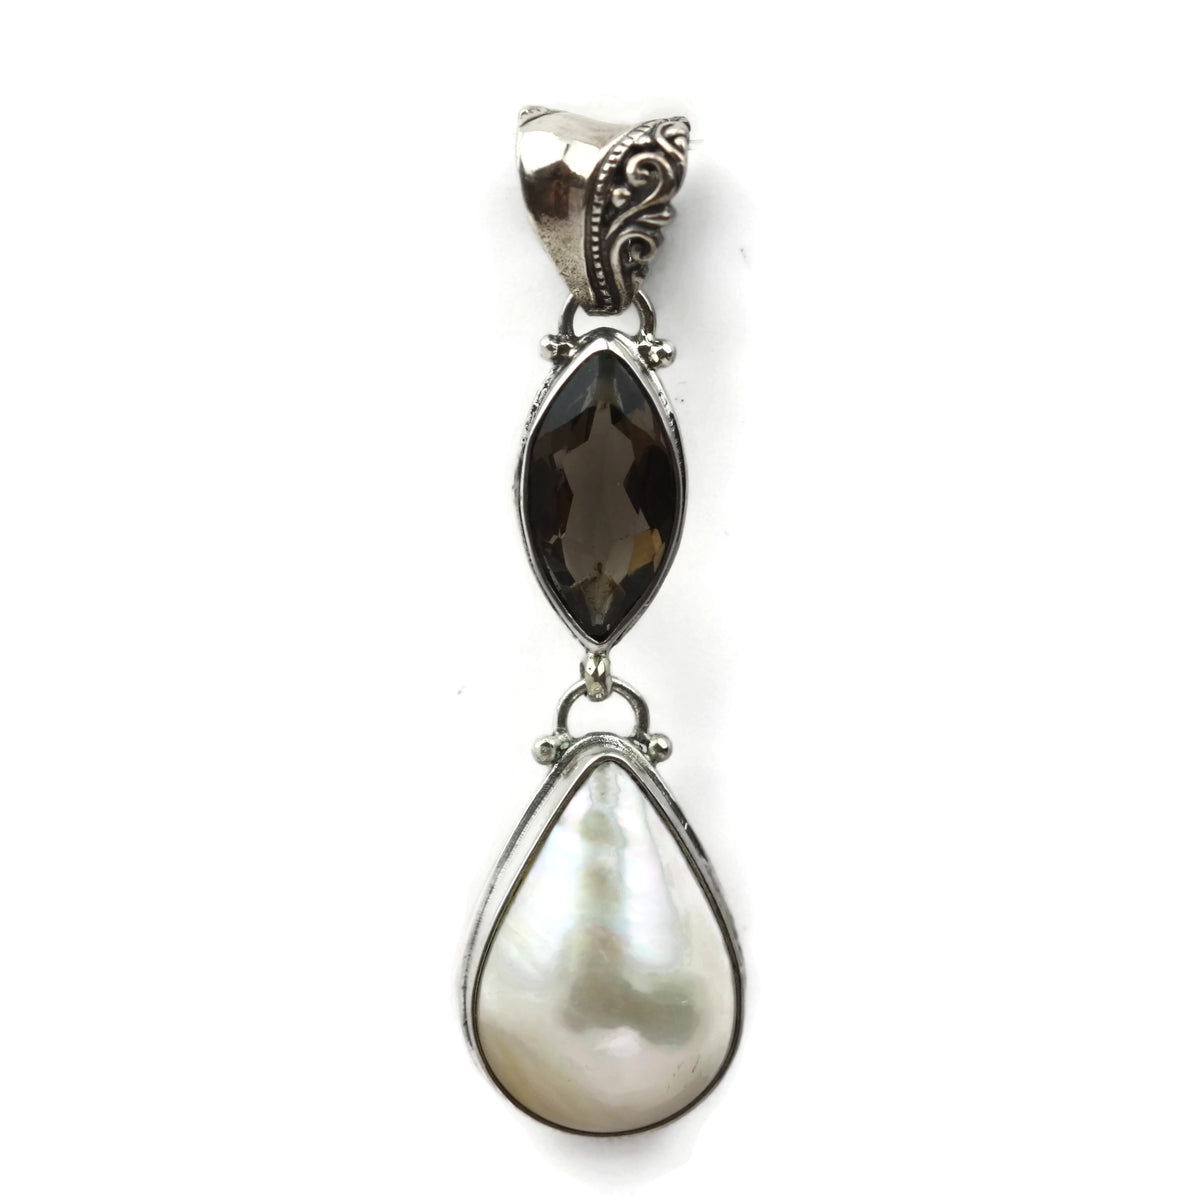 Handmade 925 Sterling Silver Teardrop Pearl & Oval Smoky Faceted Quartz Pendant with Decorative Bail